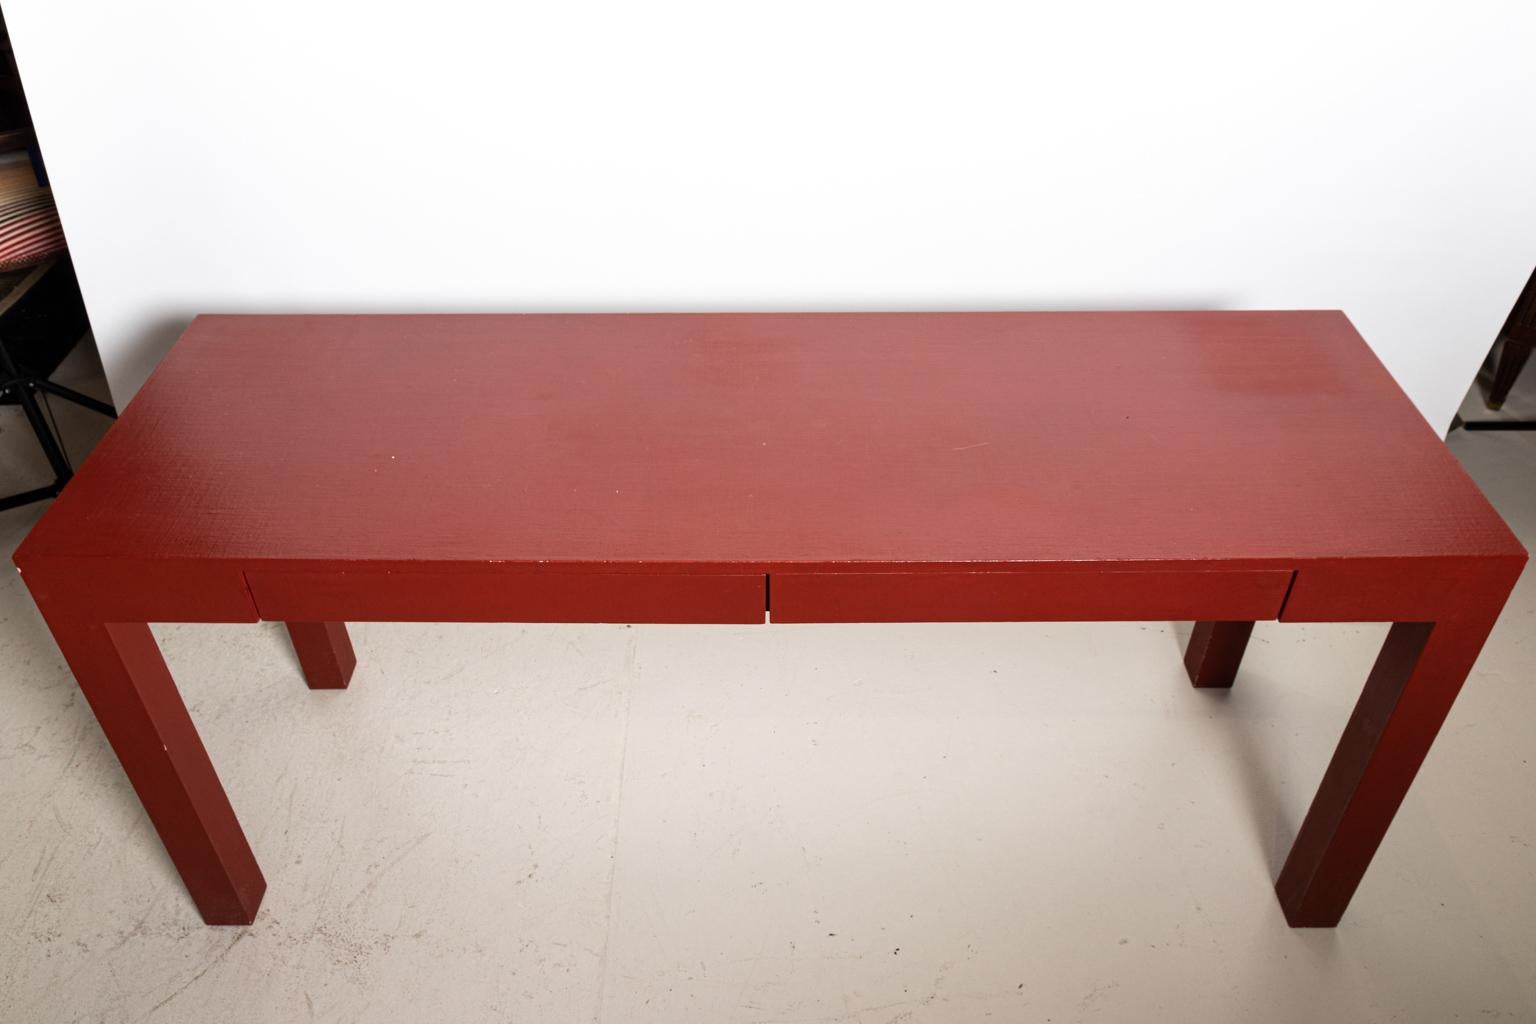 20th Century Red Painted Console Table with Two Drawers